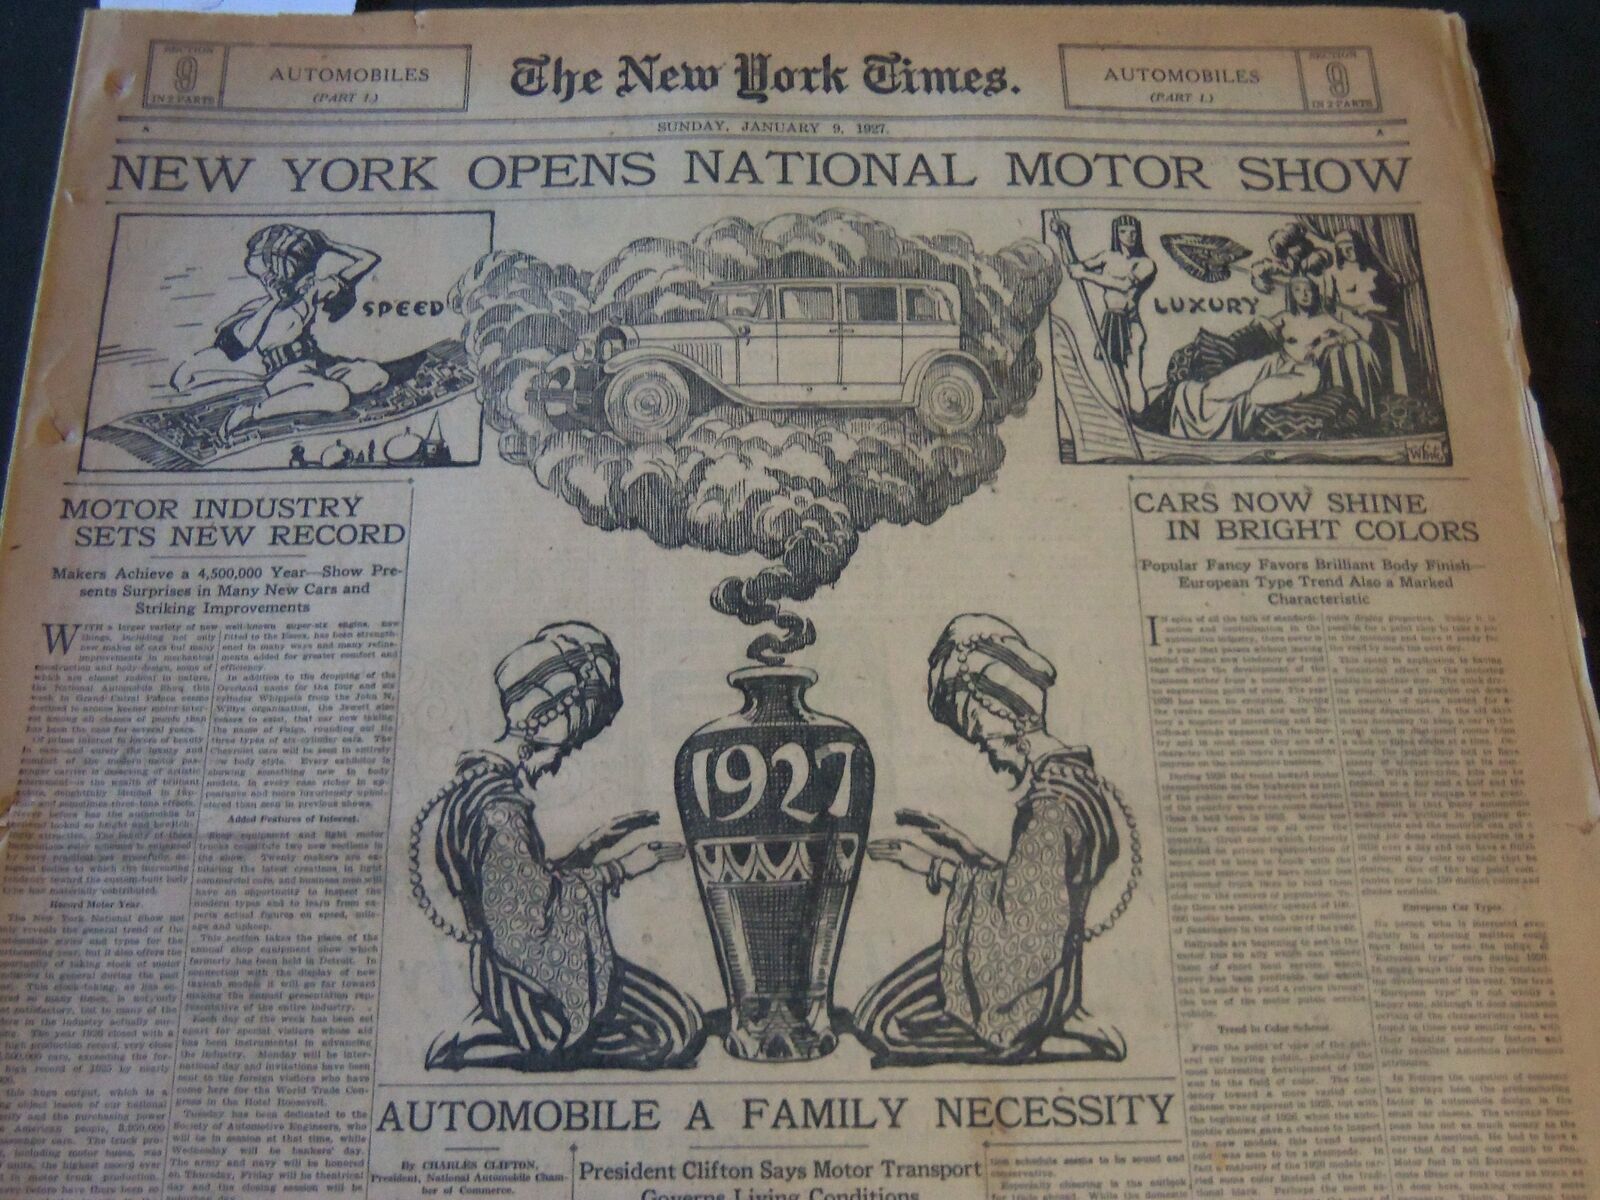 1927 JANUARY 9 NEW YORK TIMES - NY NATIONAL MOTOR SHOW OPENS - NT 6287